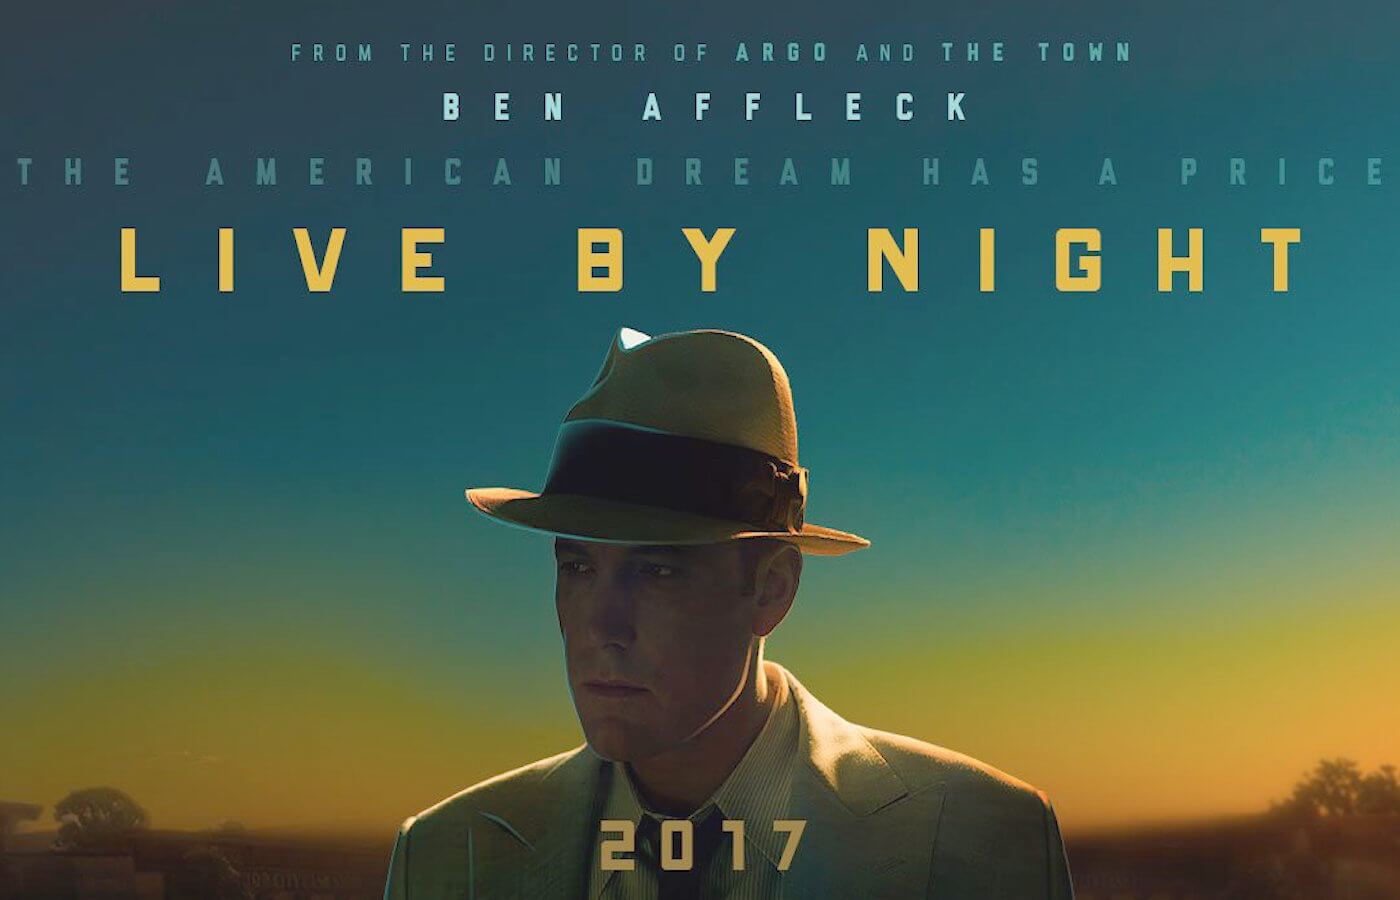 Live by night teaser banner